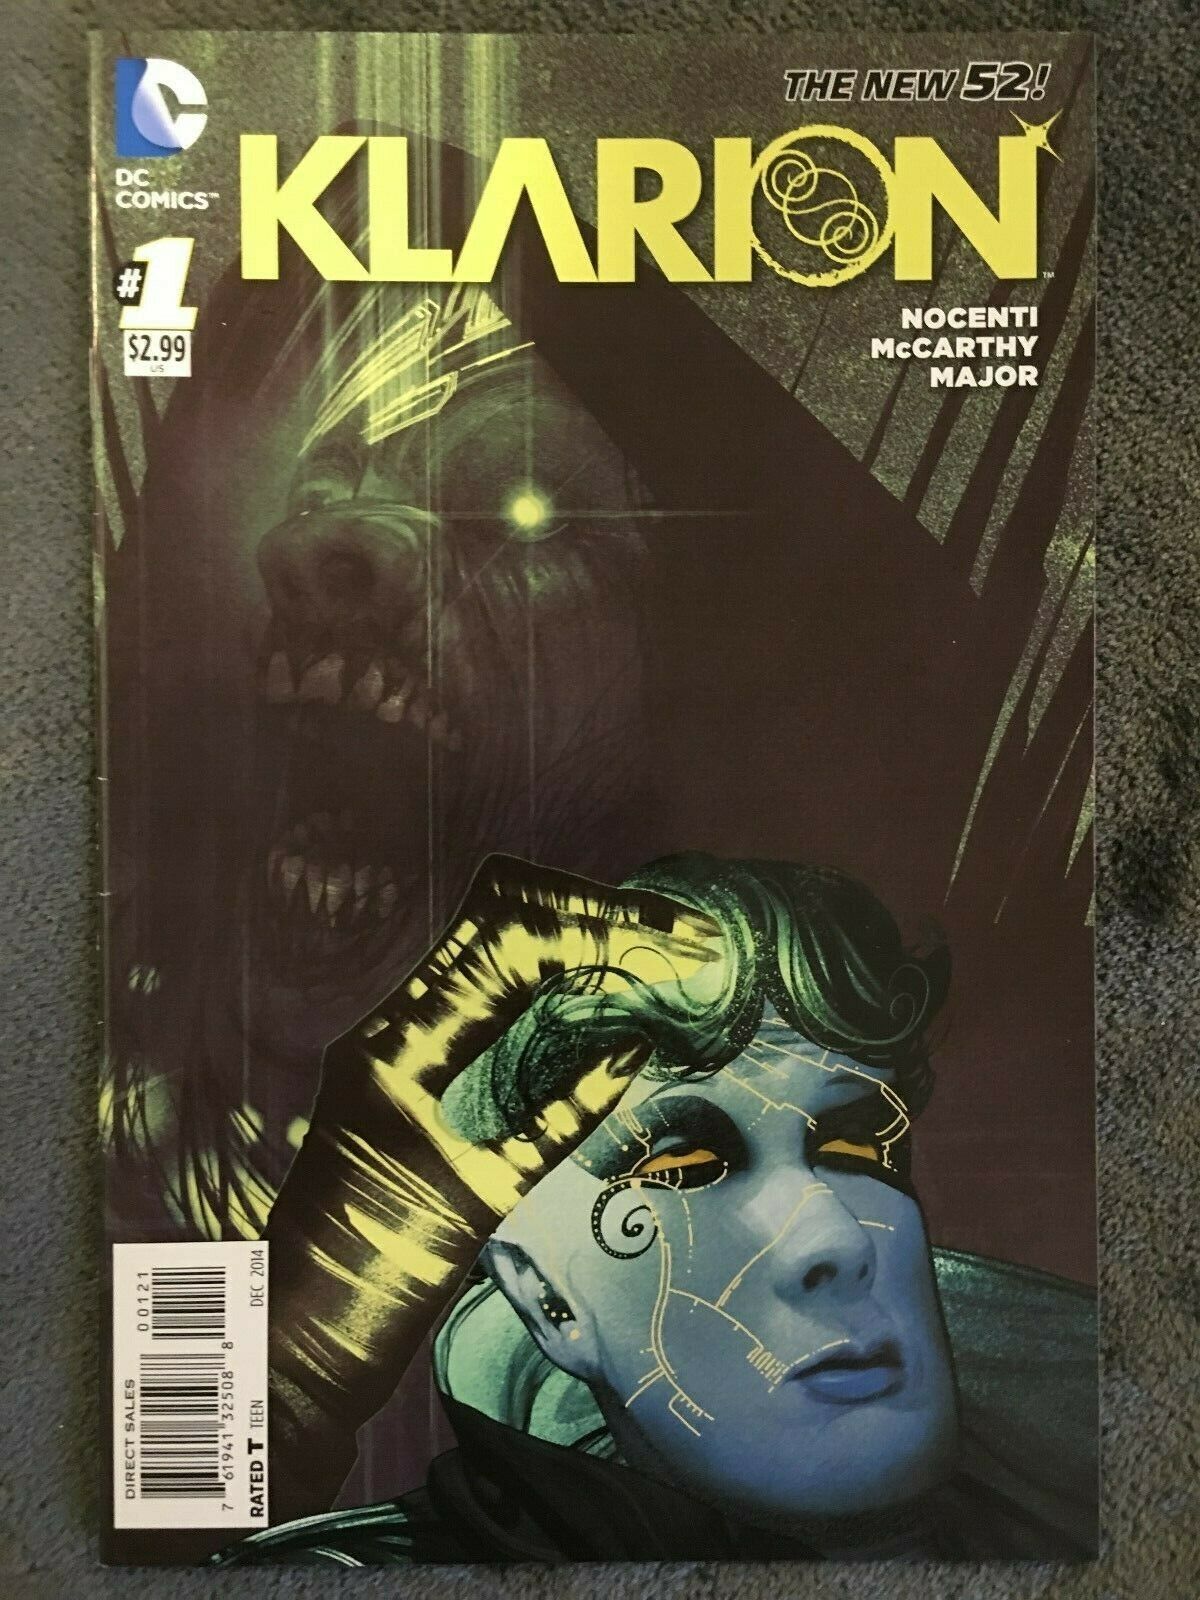 Klarion #1 DC Comics December 2014 Comic Book Issue, Rated T For Teen